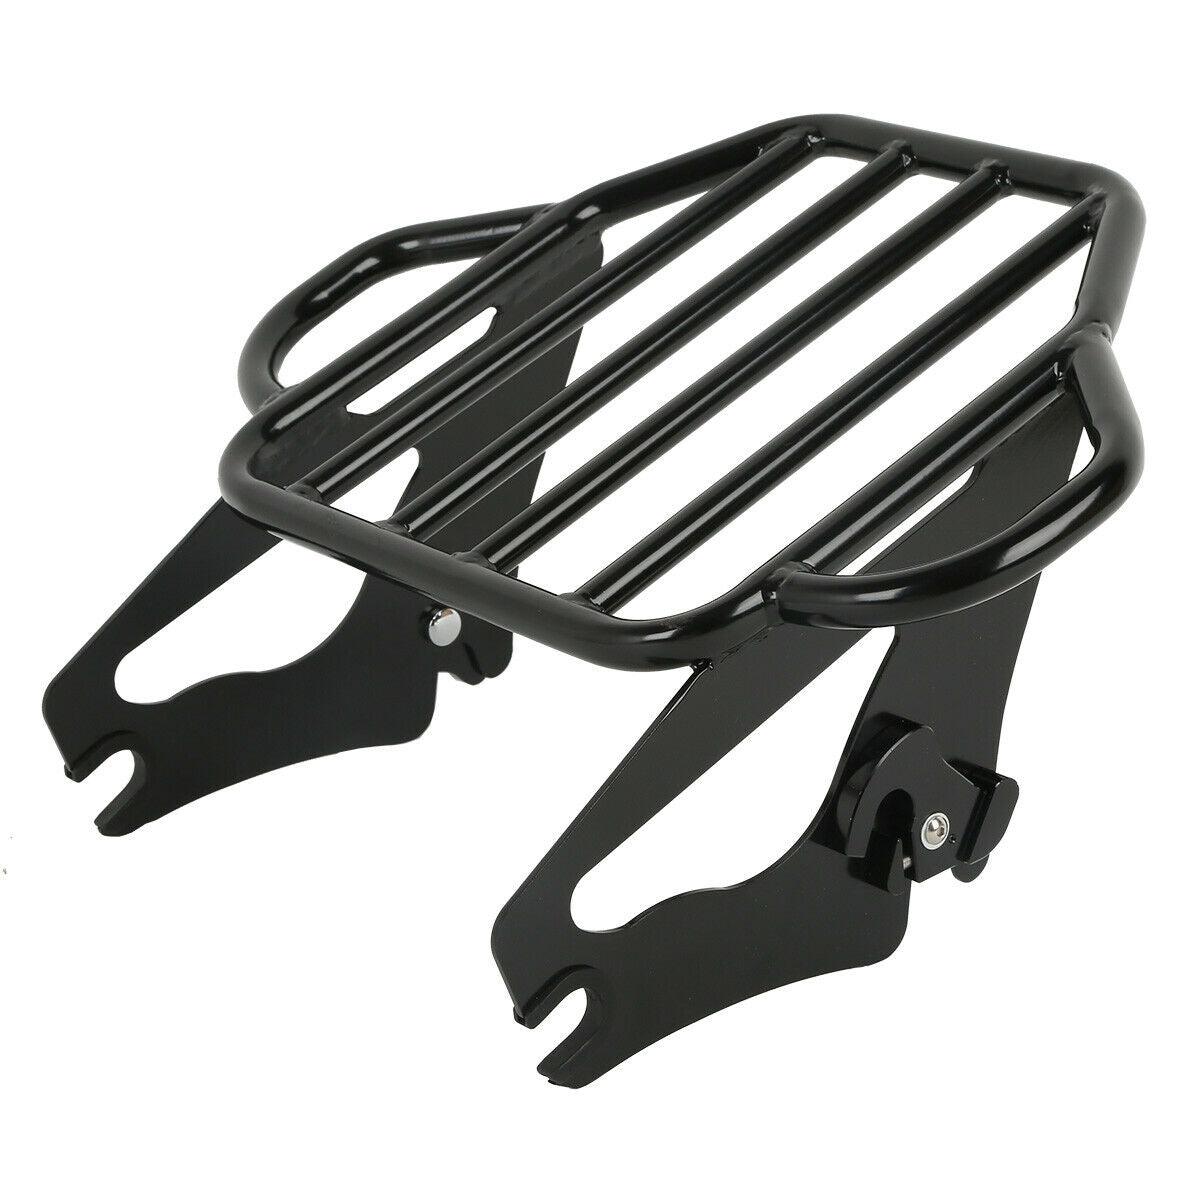 Black Detachable Luggage Rack Fit For Harley Road King Electra Glide 2009-2022 - Moto Life Products